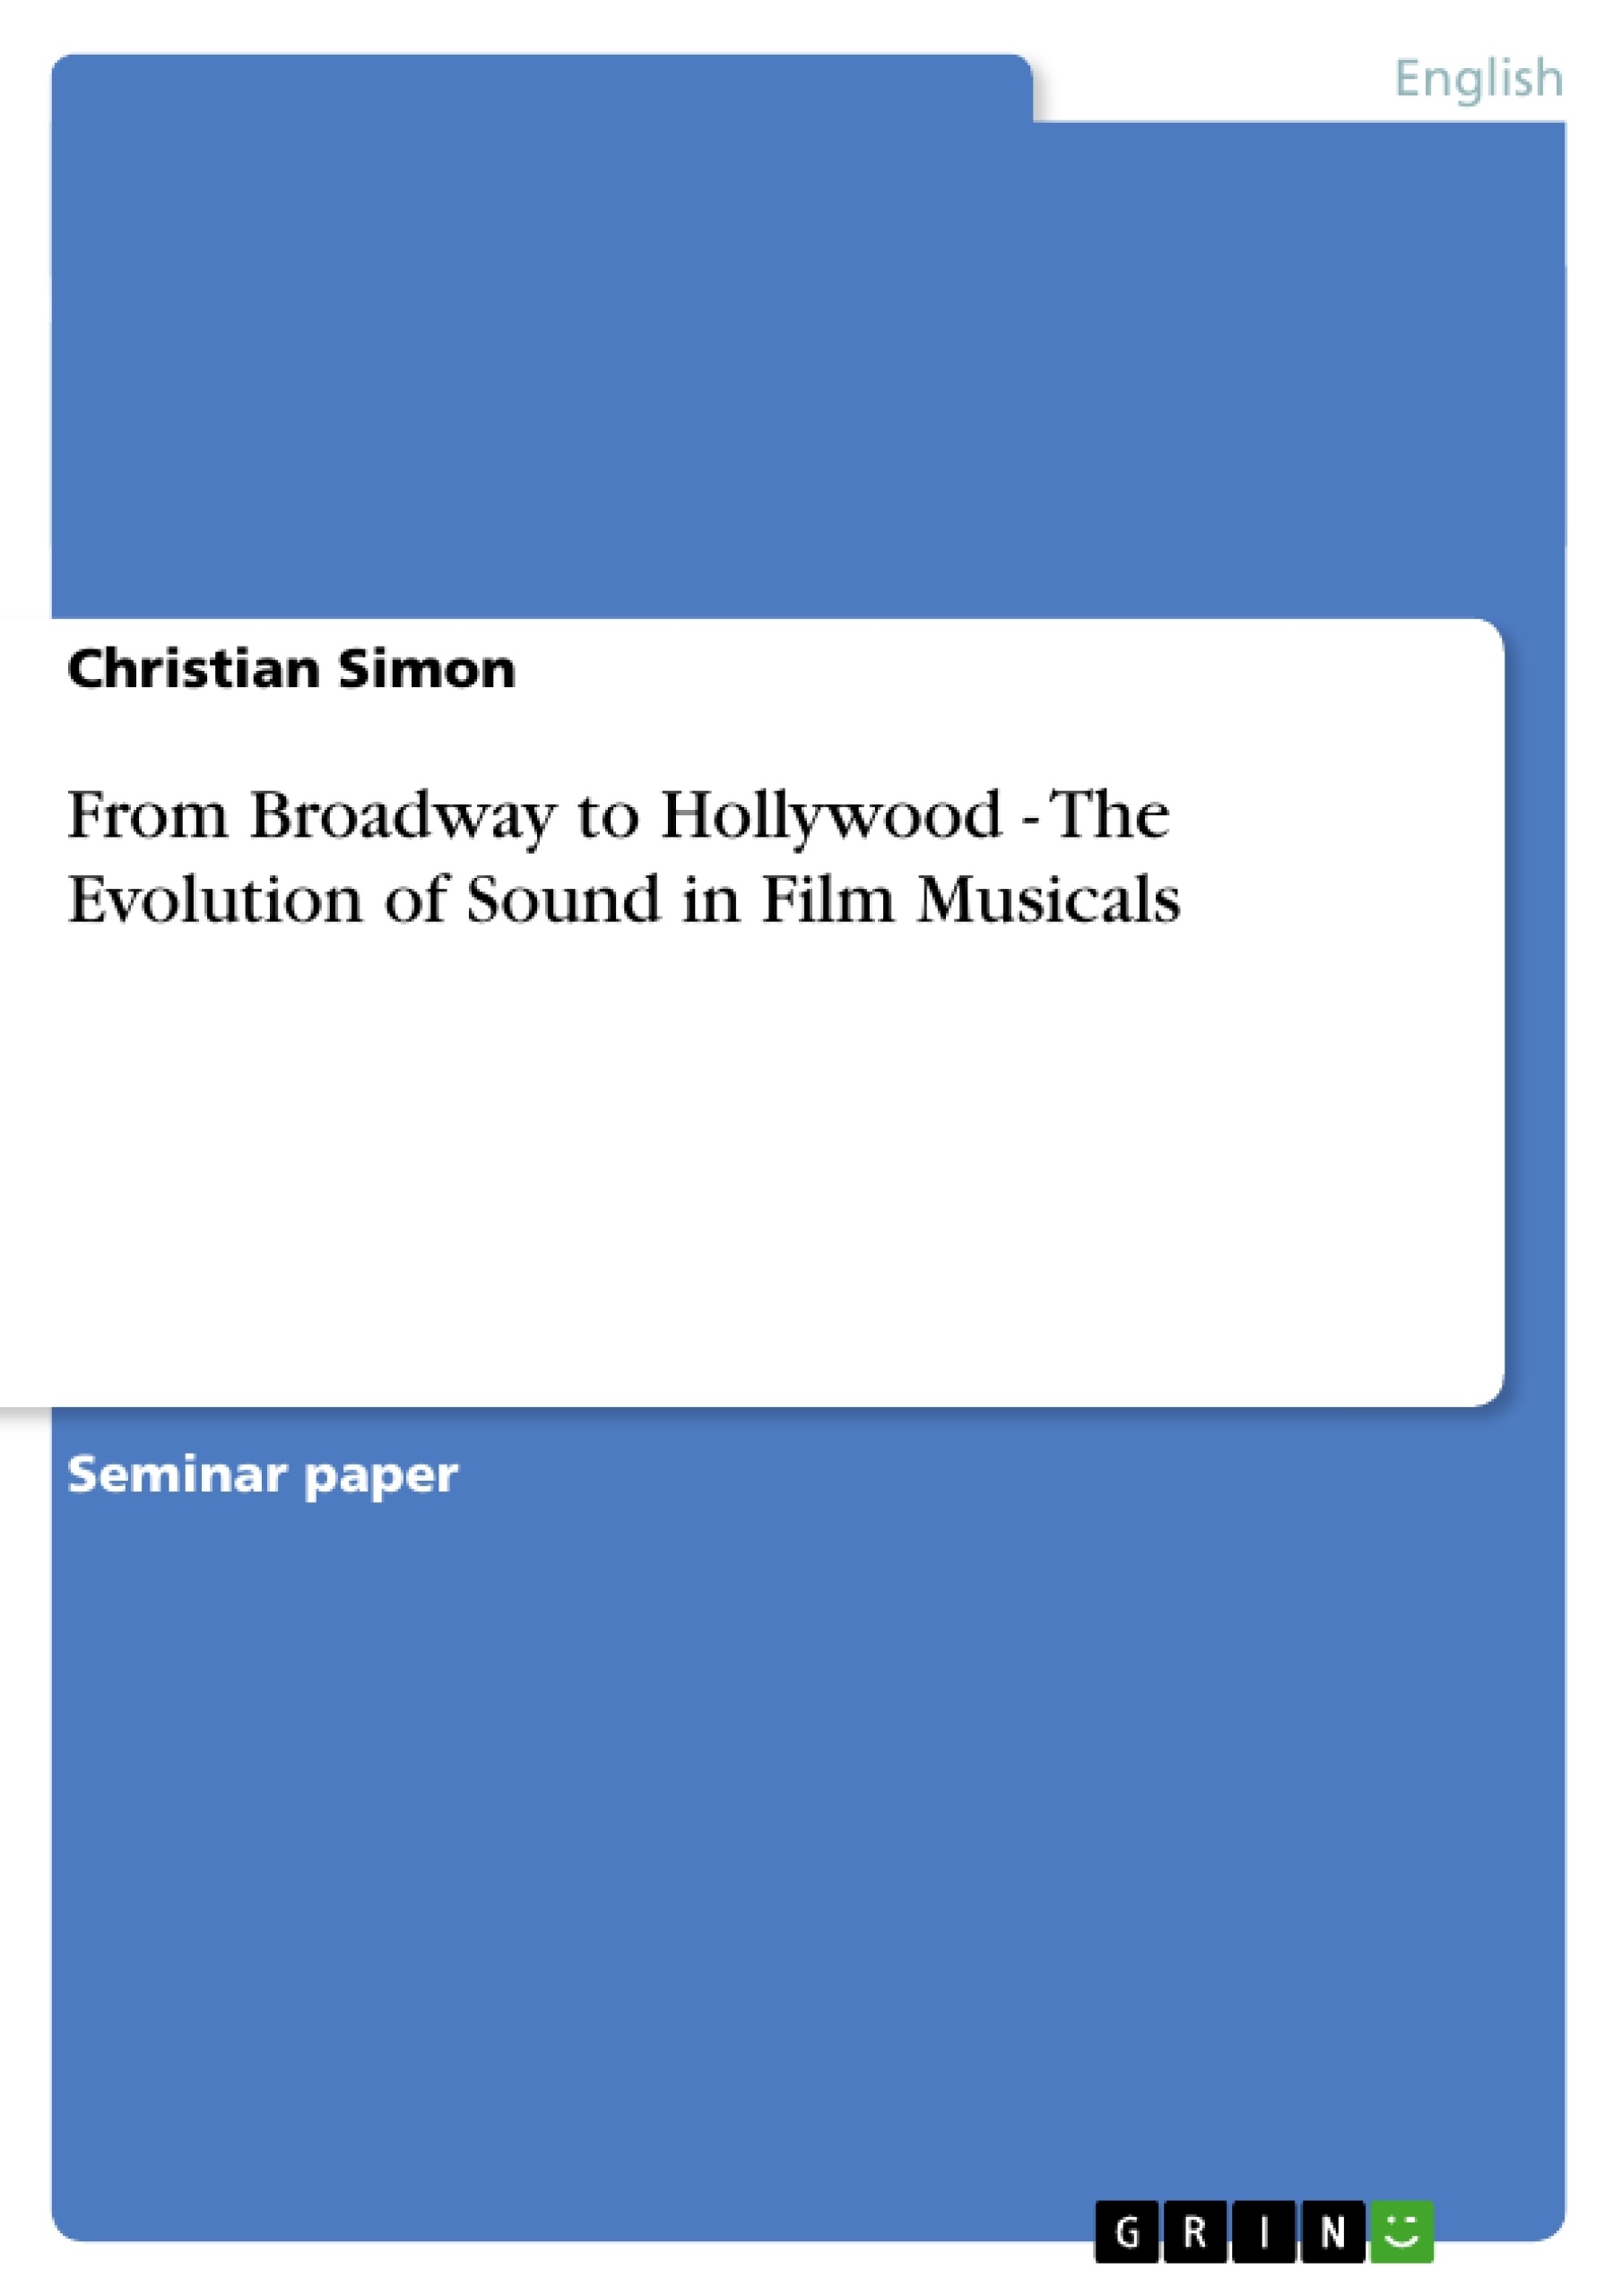 Title: From Broadway to Hollywood - The Evolution of Sound in Film Musicals